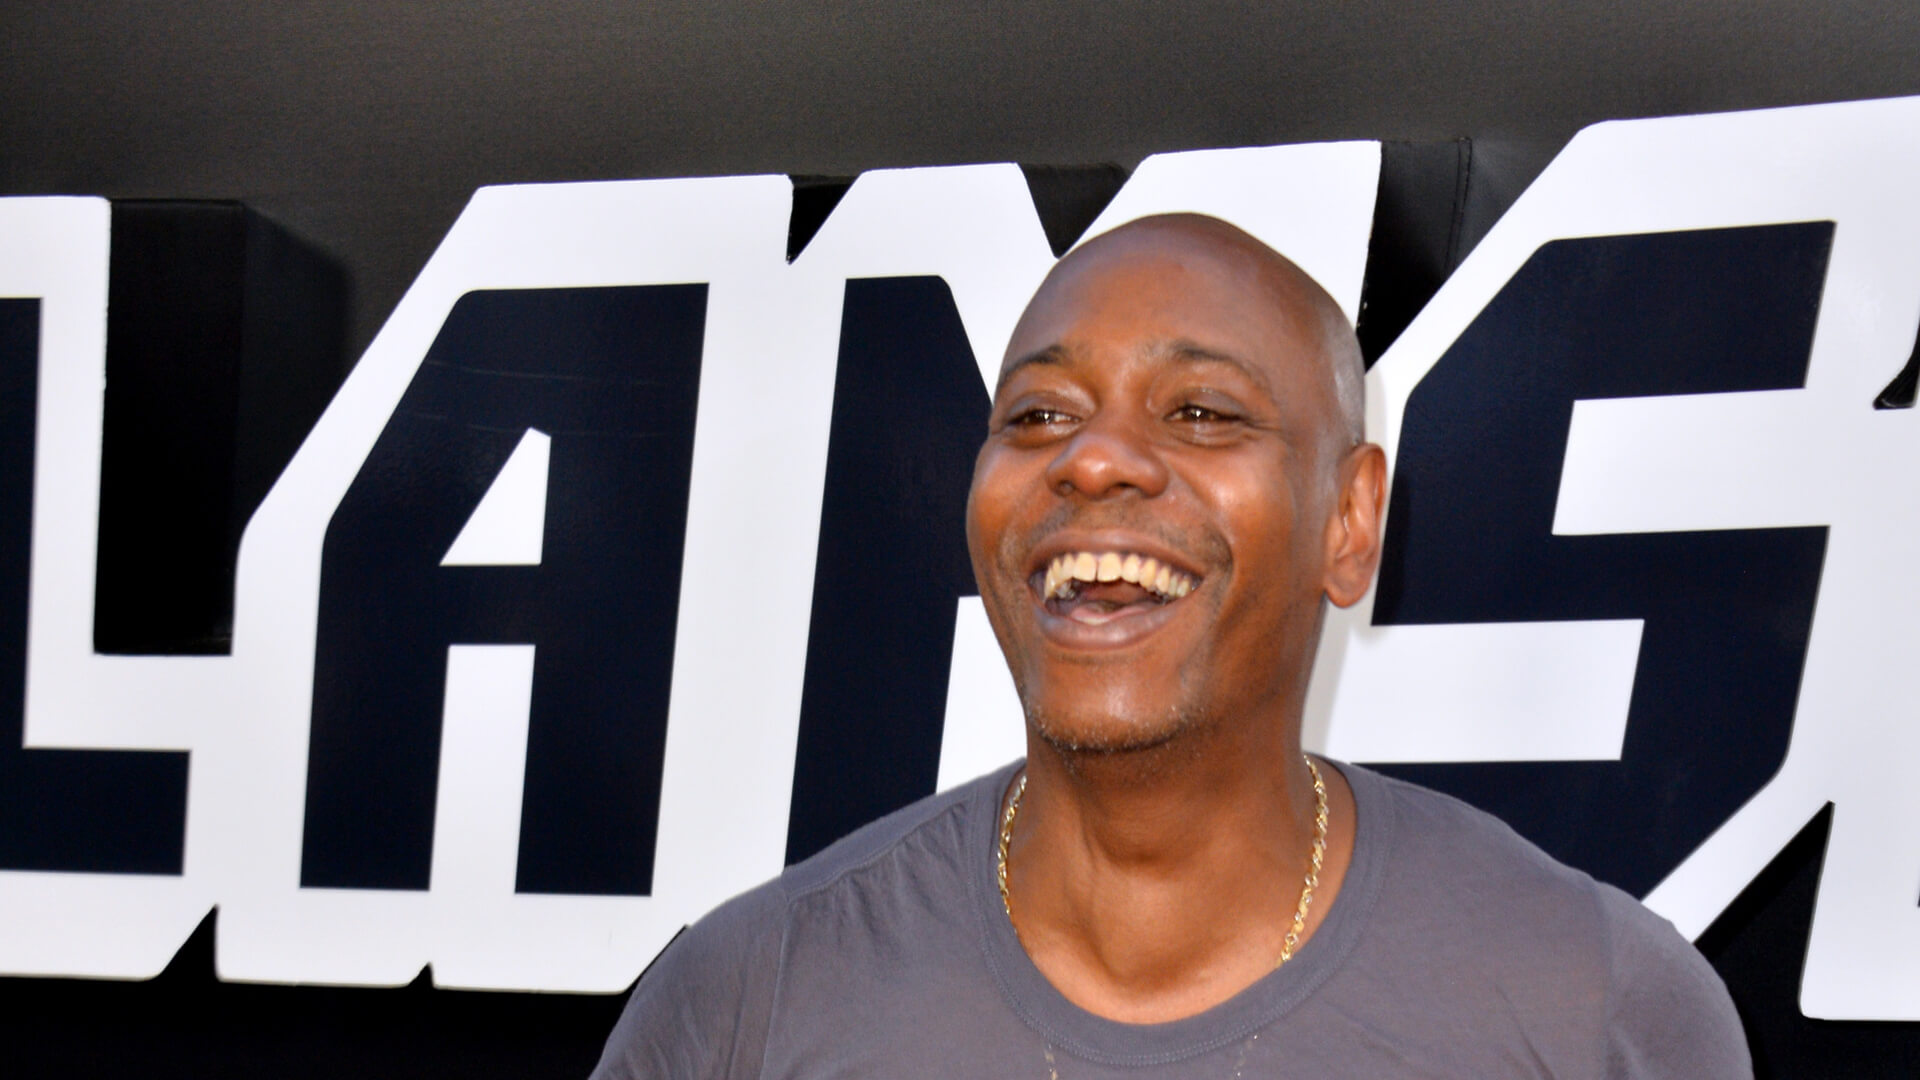 Dave Chappelle at a Los Angeles premiere